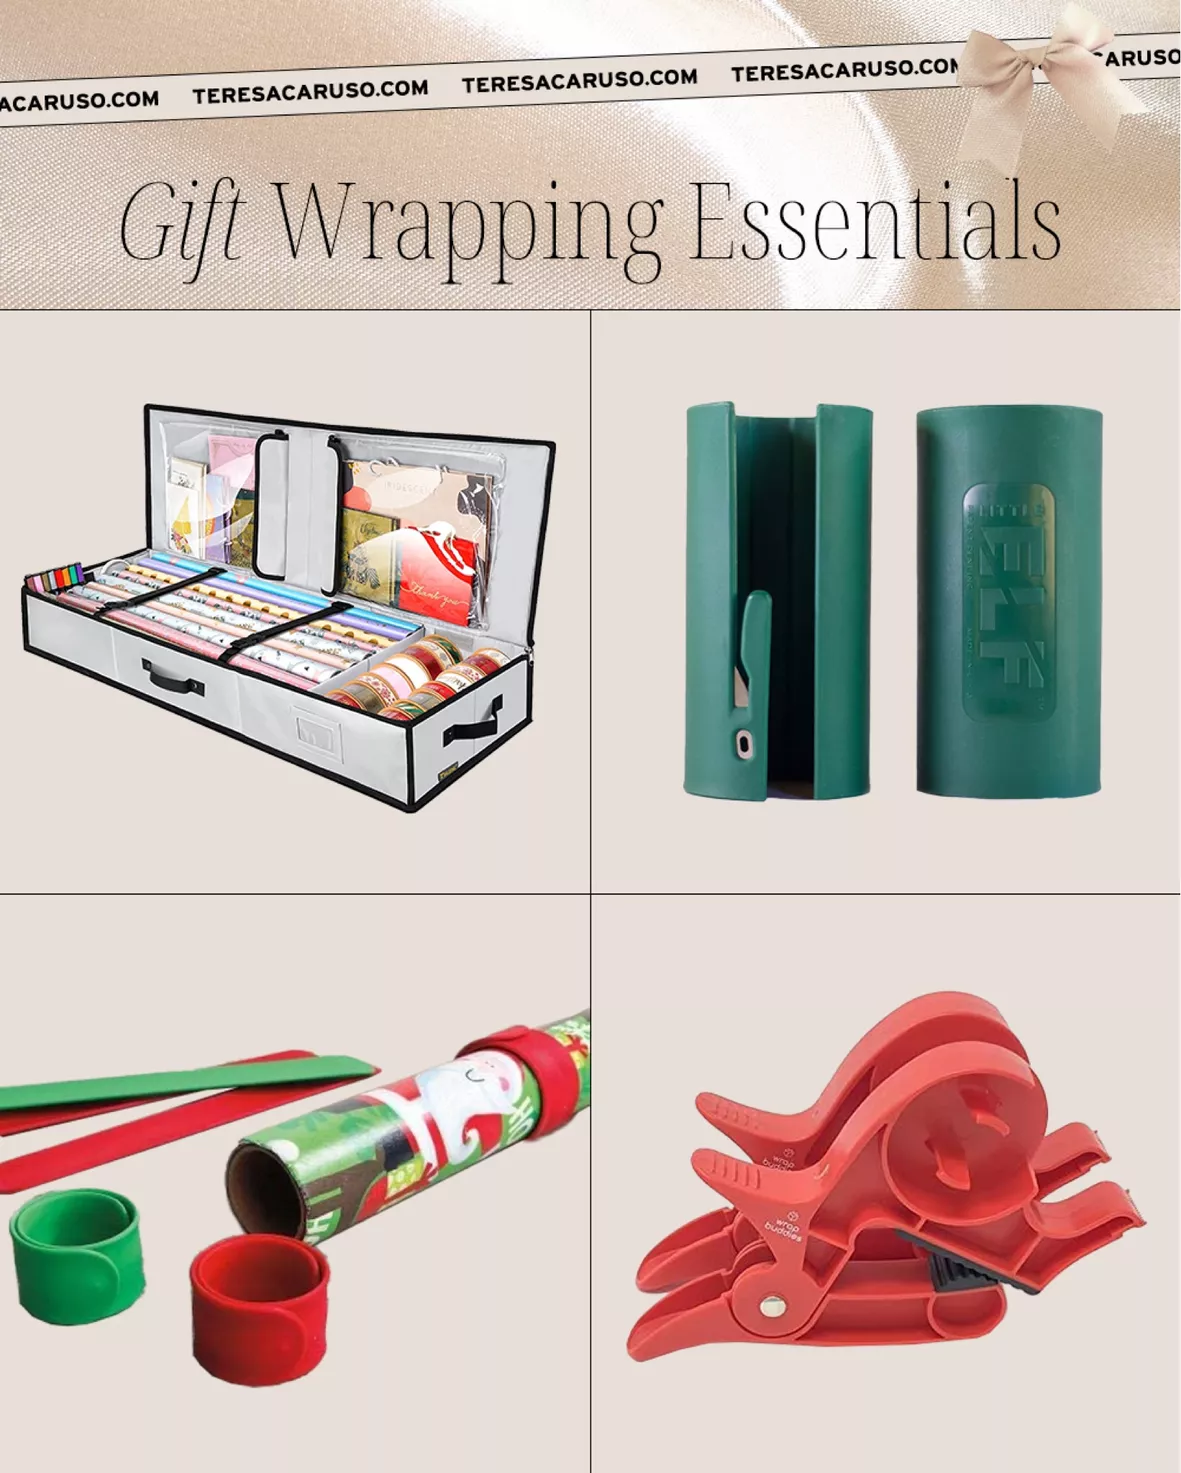 Wrap Buddies curated on LTK